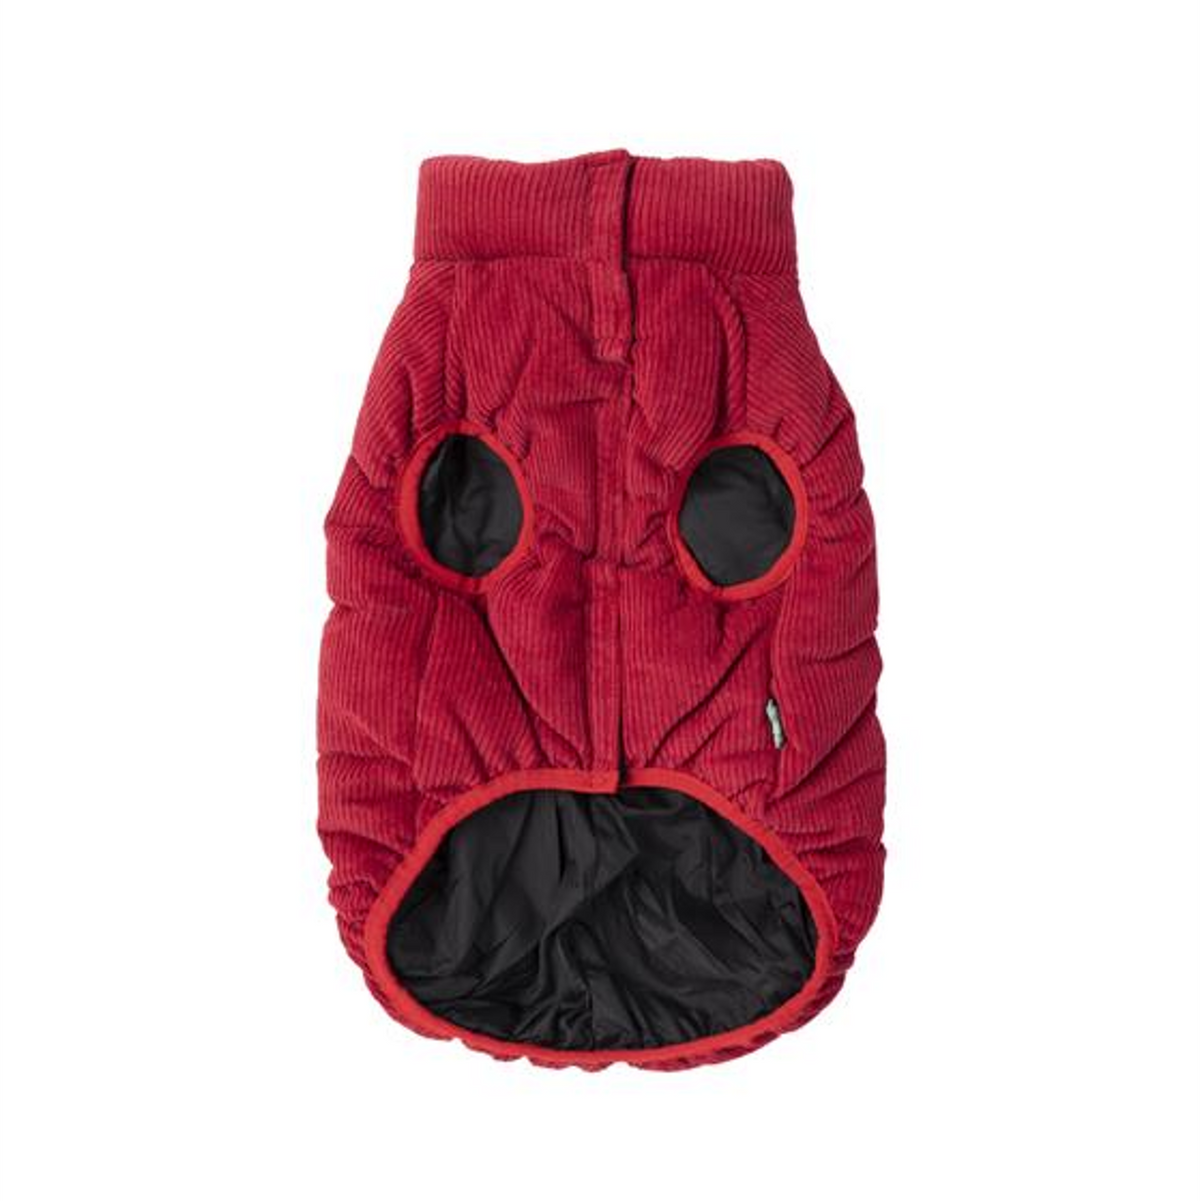 Mosman Puffer Jacket - Red - 3 Red Rovers